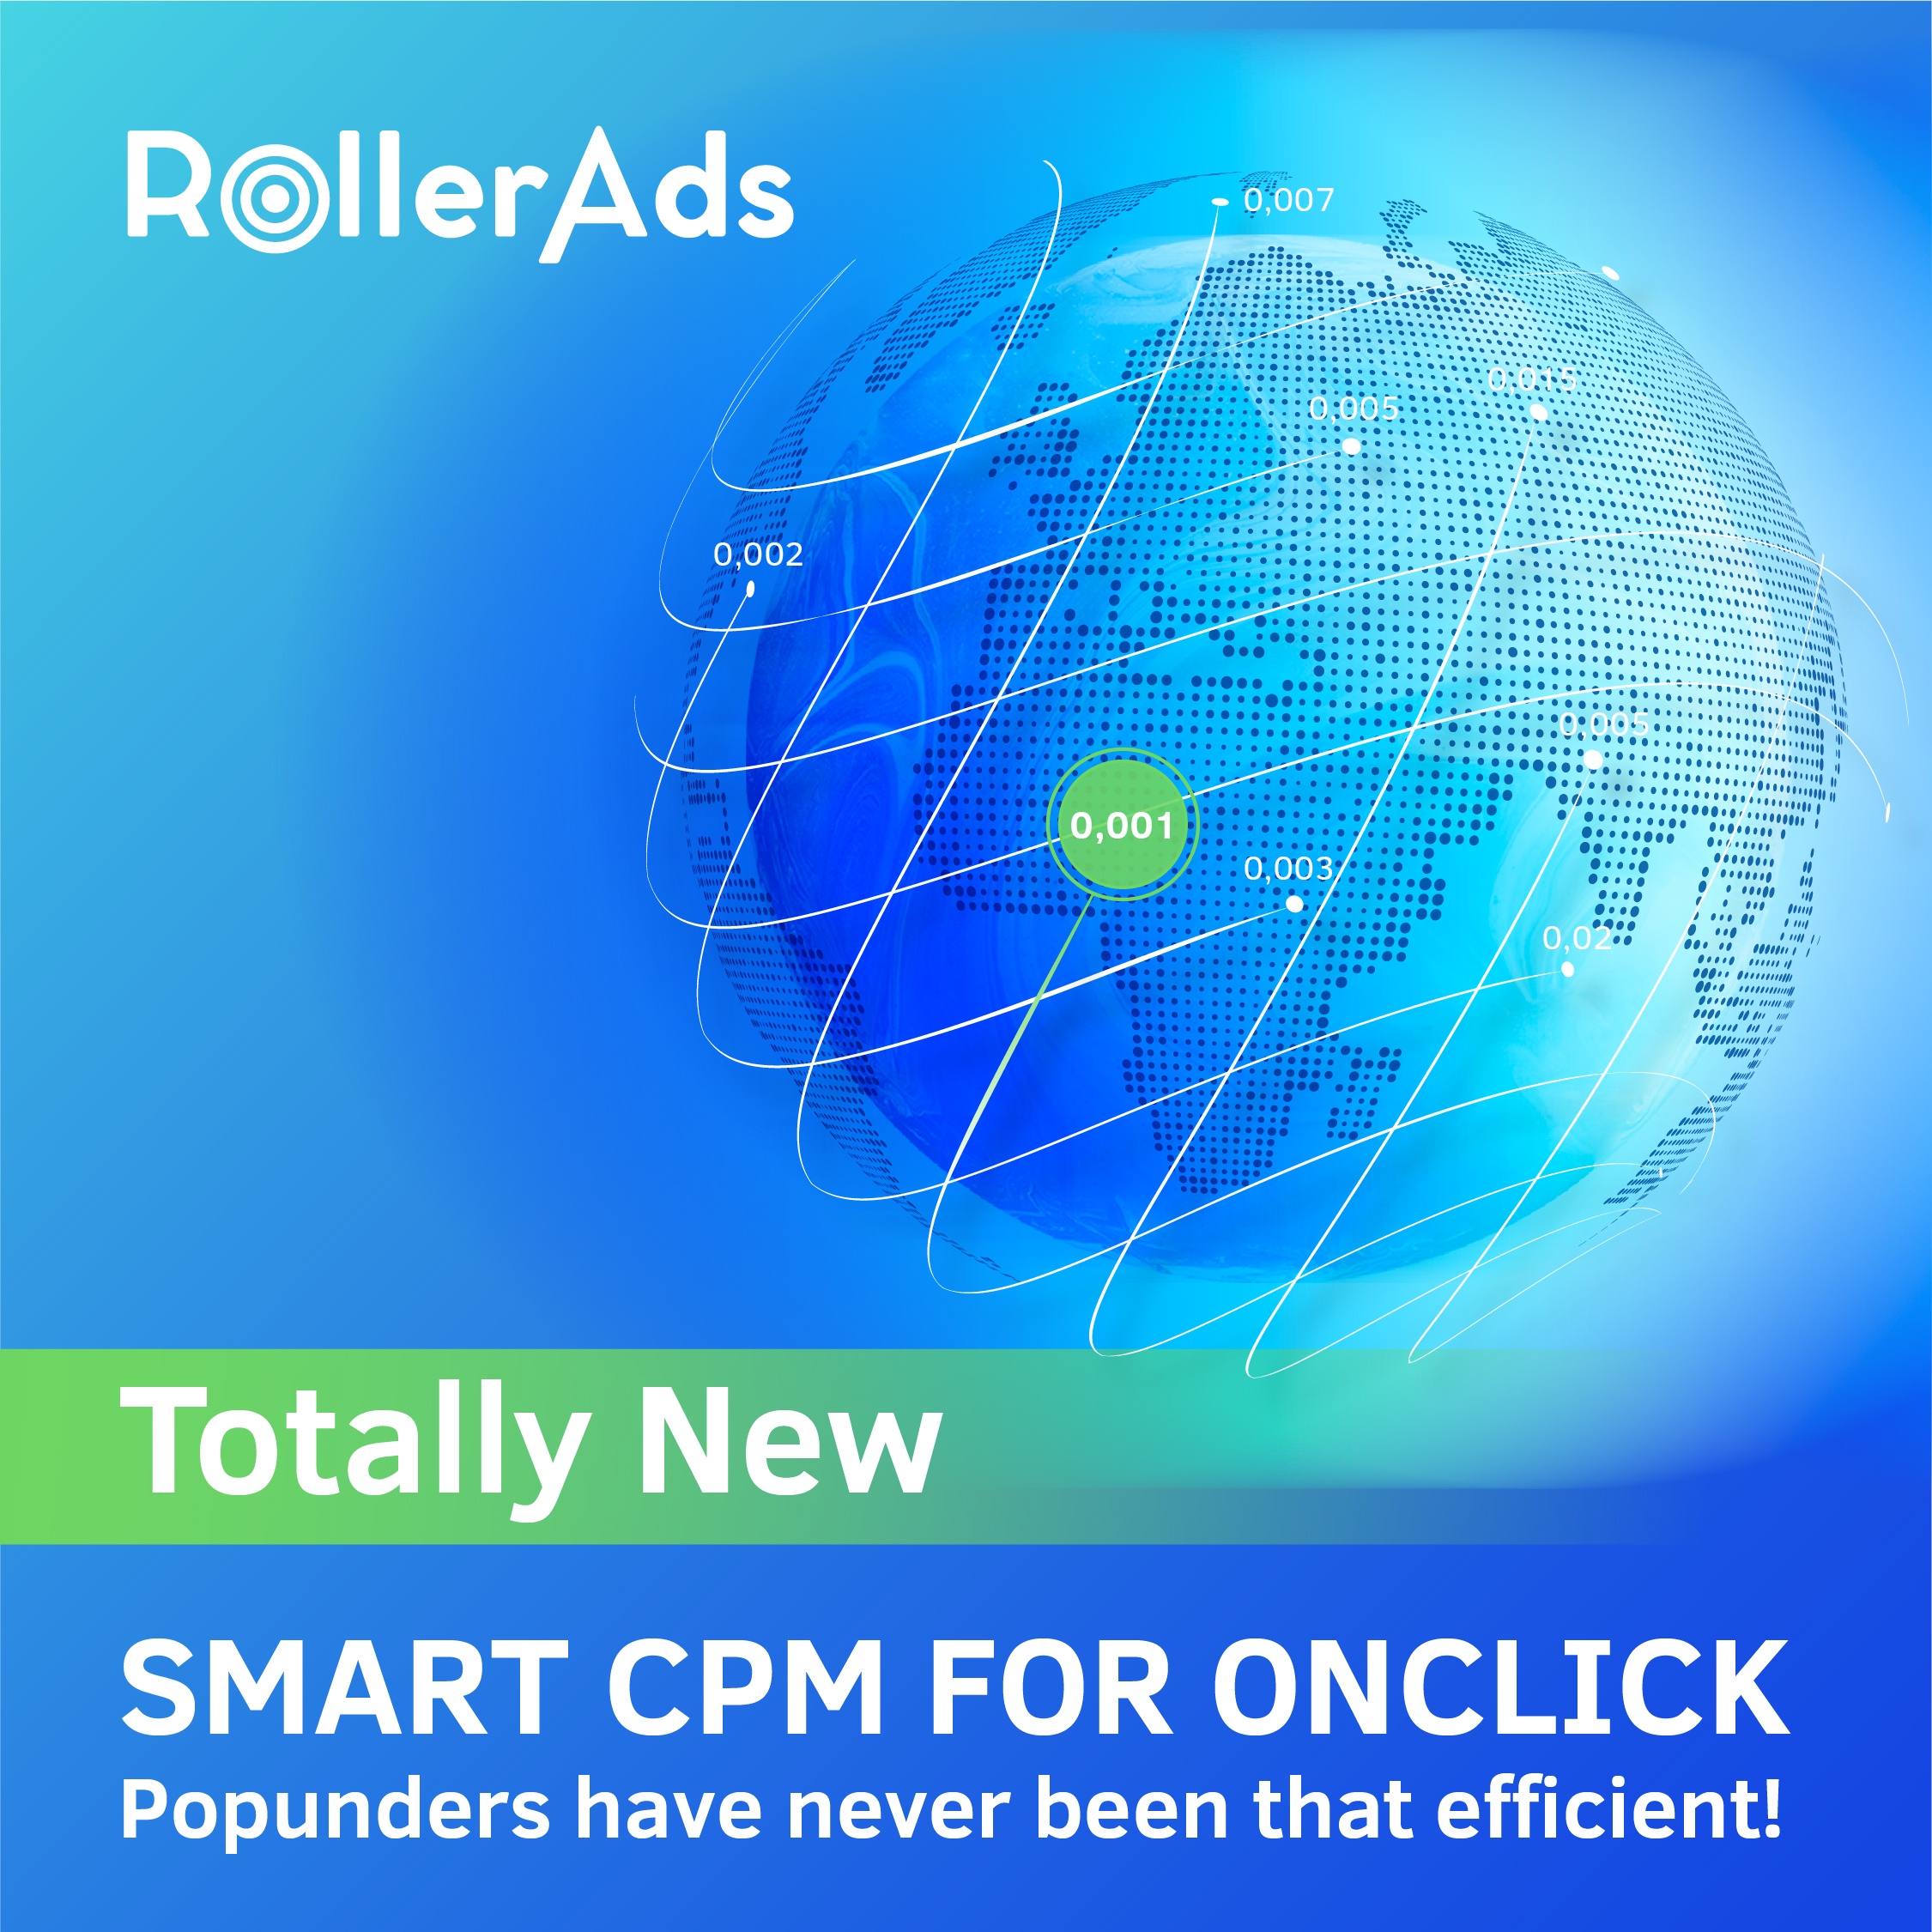 ra_banner_smart_cpm_for_onclick_1080x1080